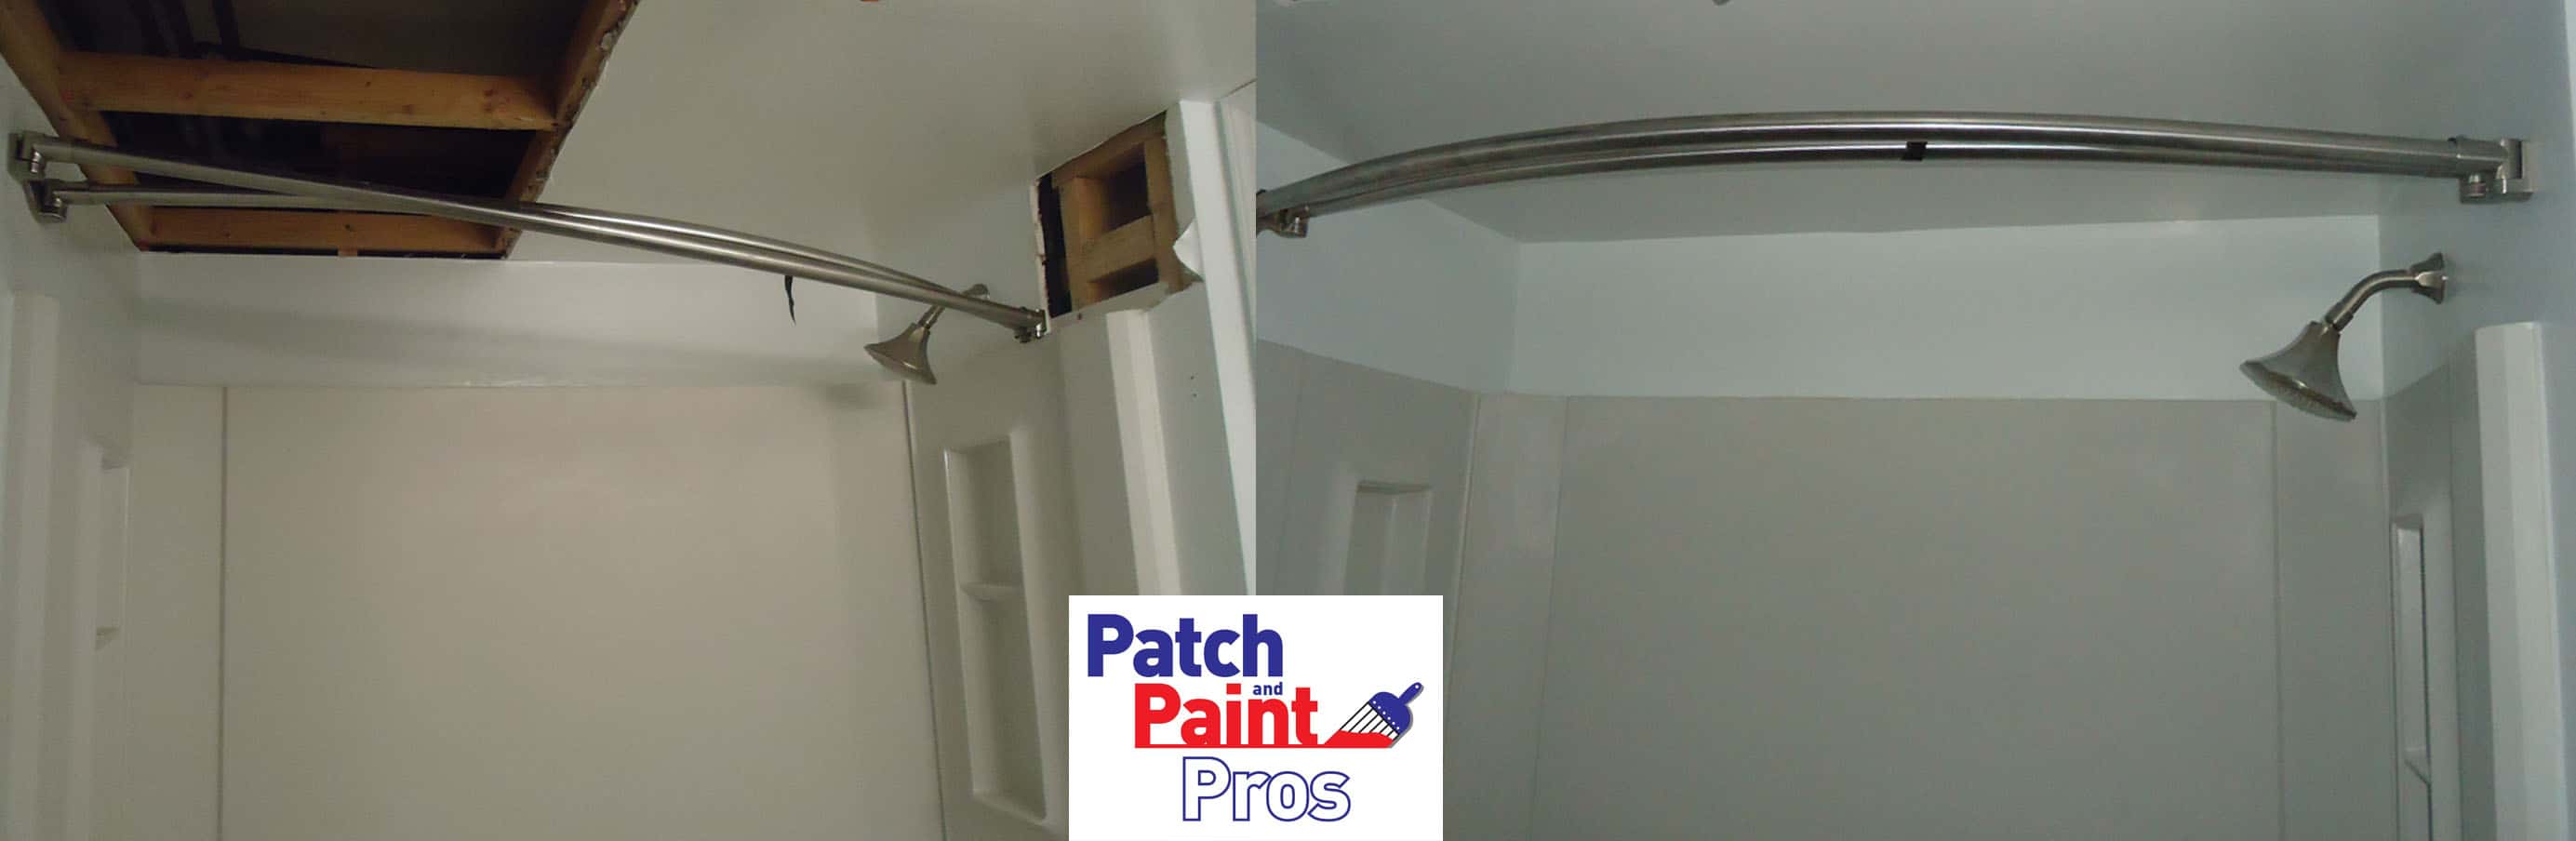 Bathroom Drywall Repair Patch And Paint Pros Llc